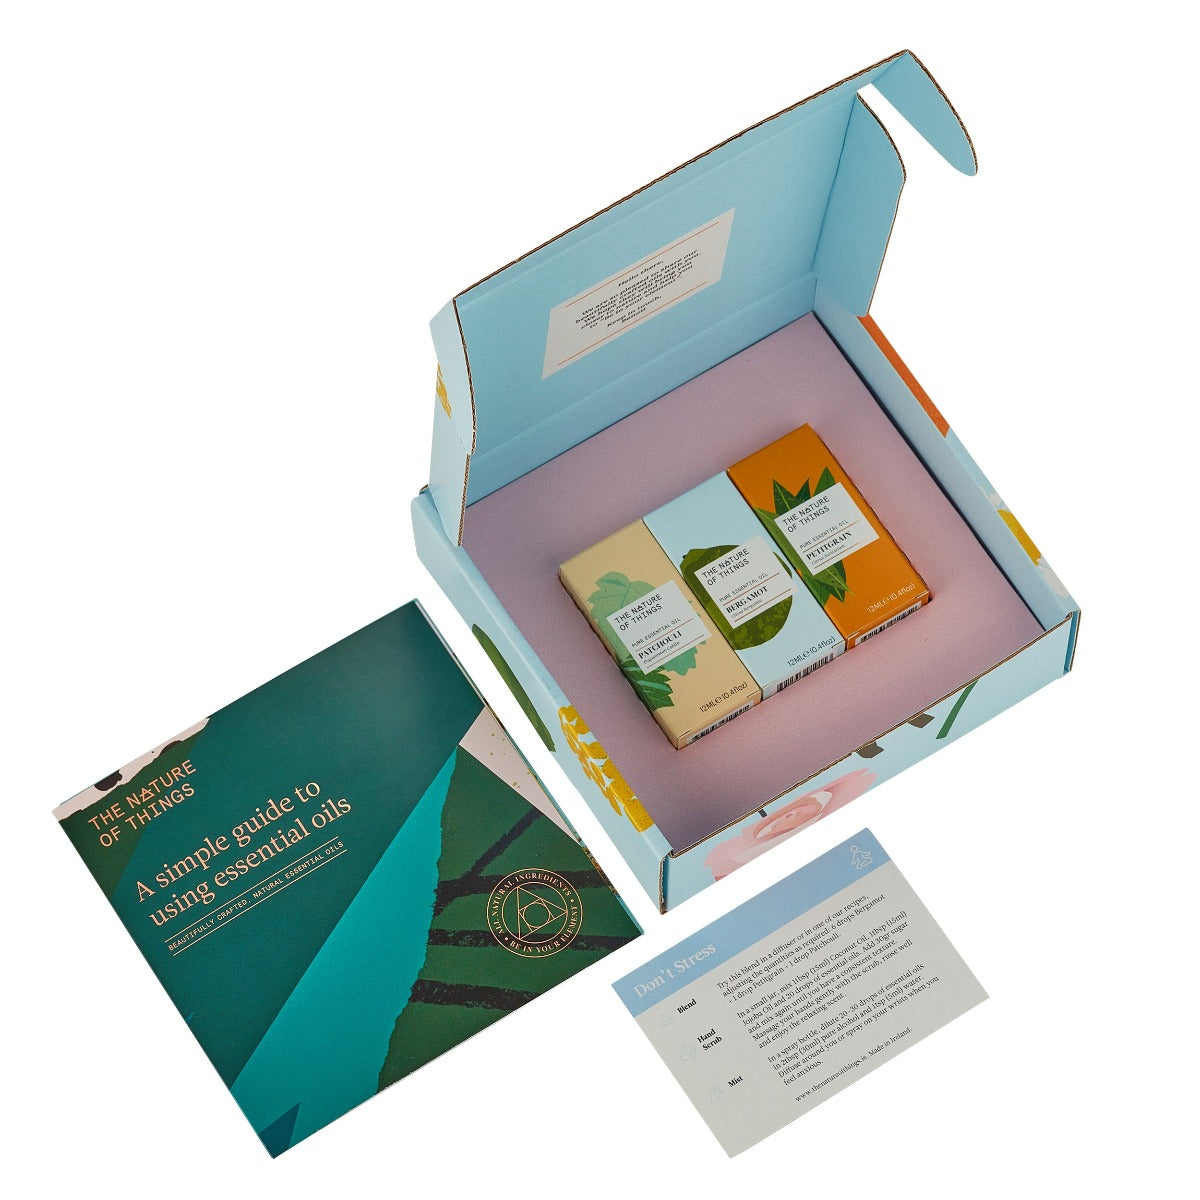 Gift Set - Don't Stress from The Nature of Things